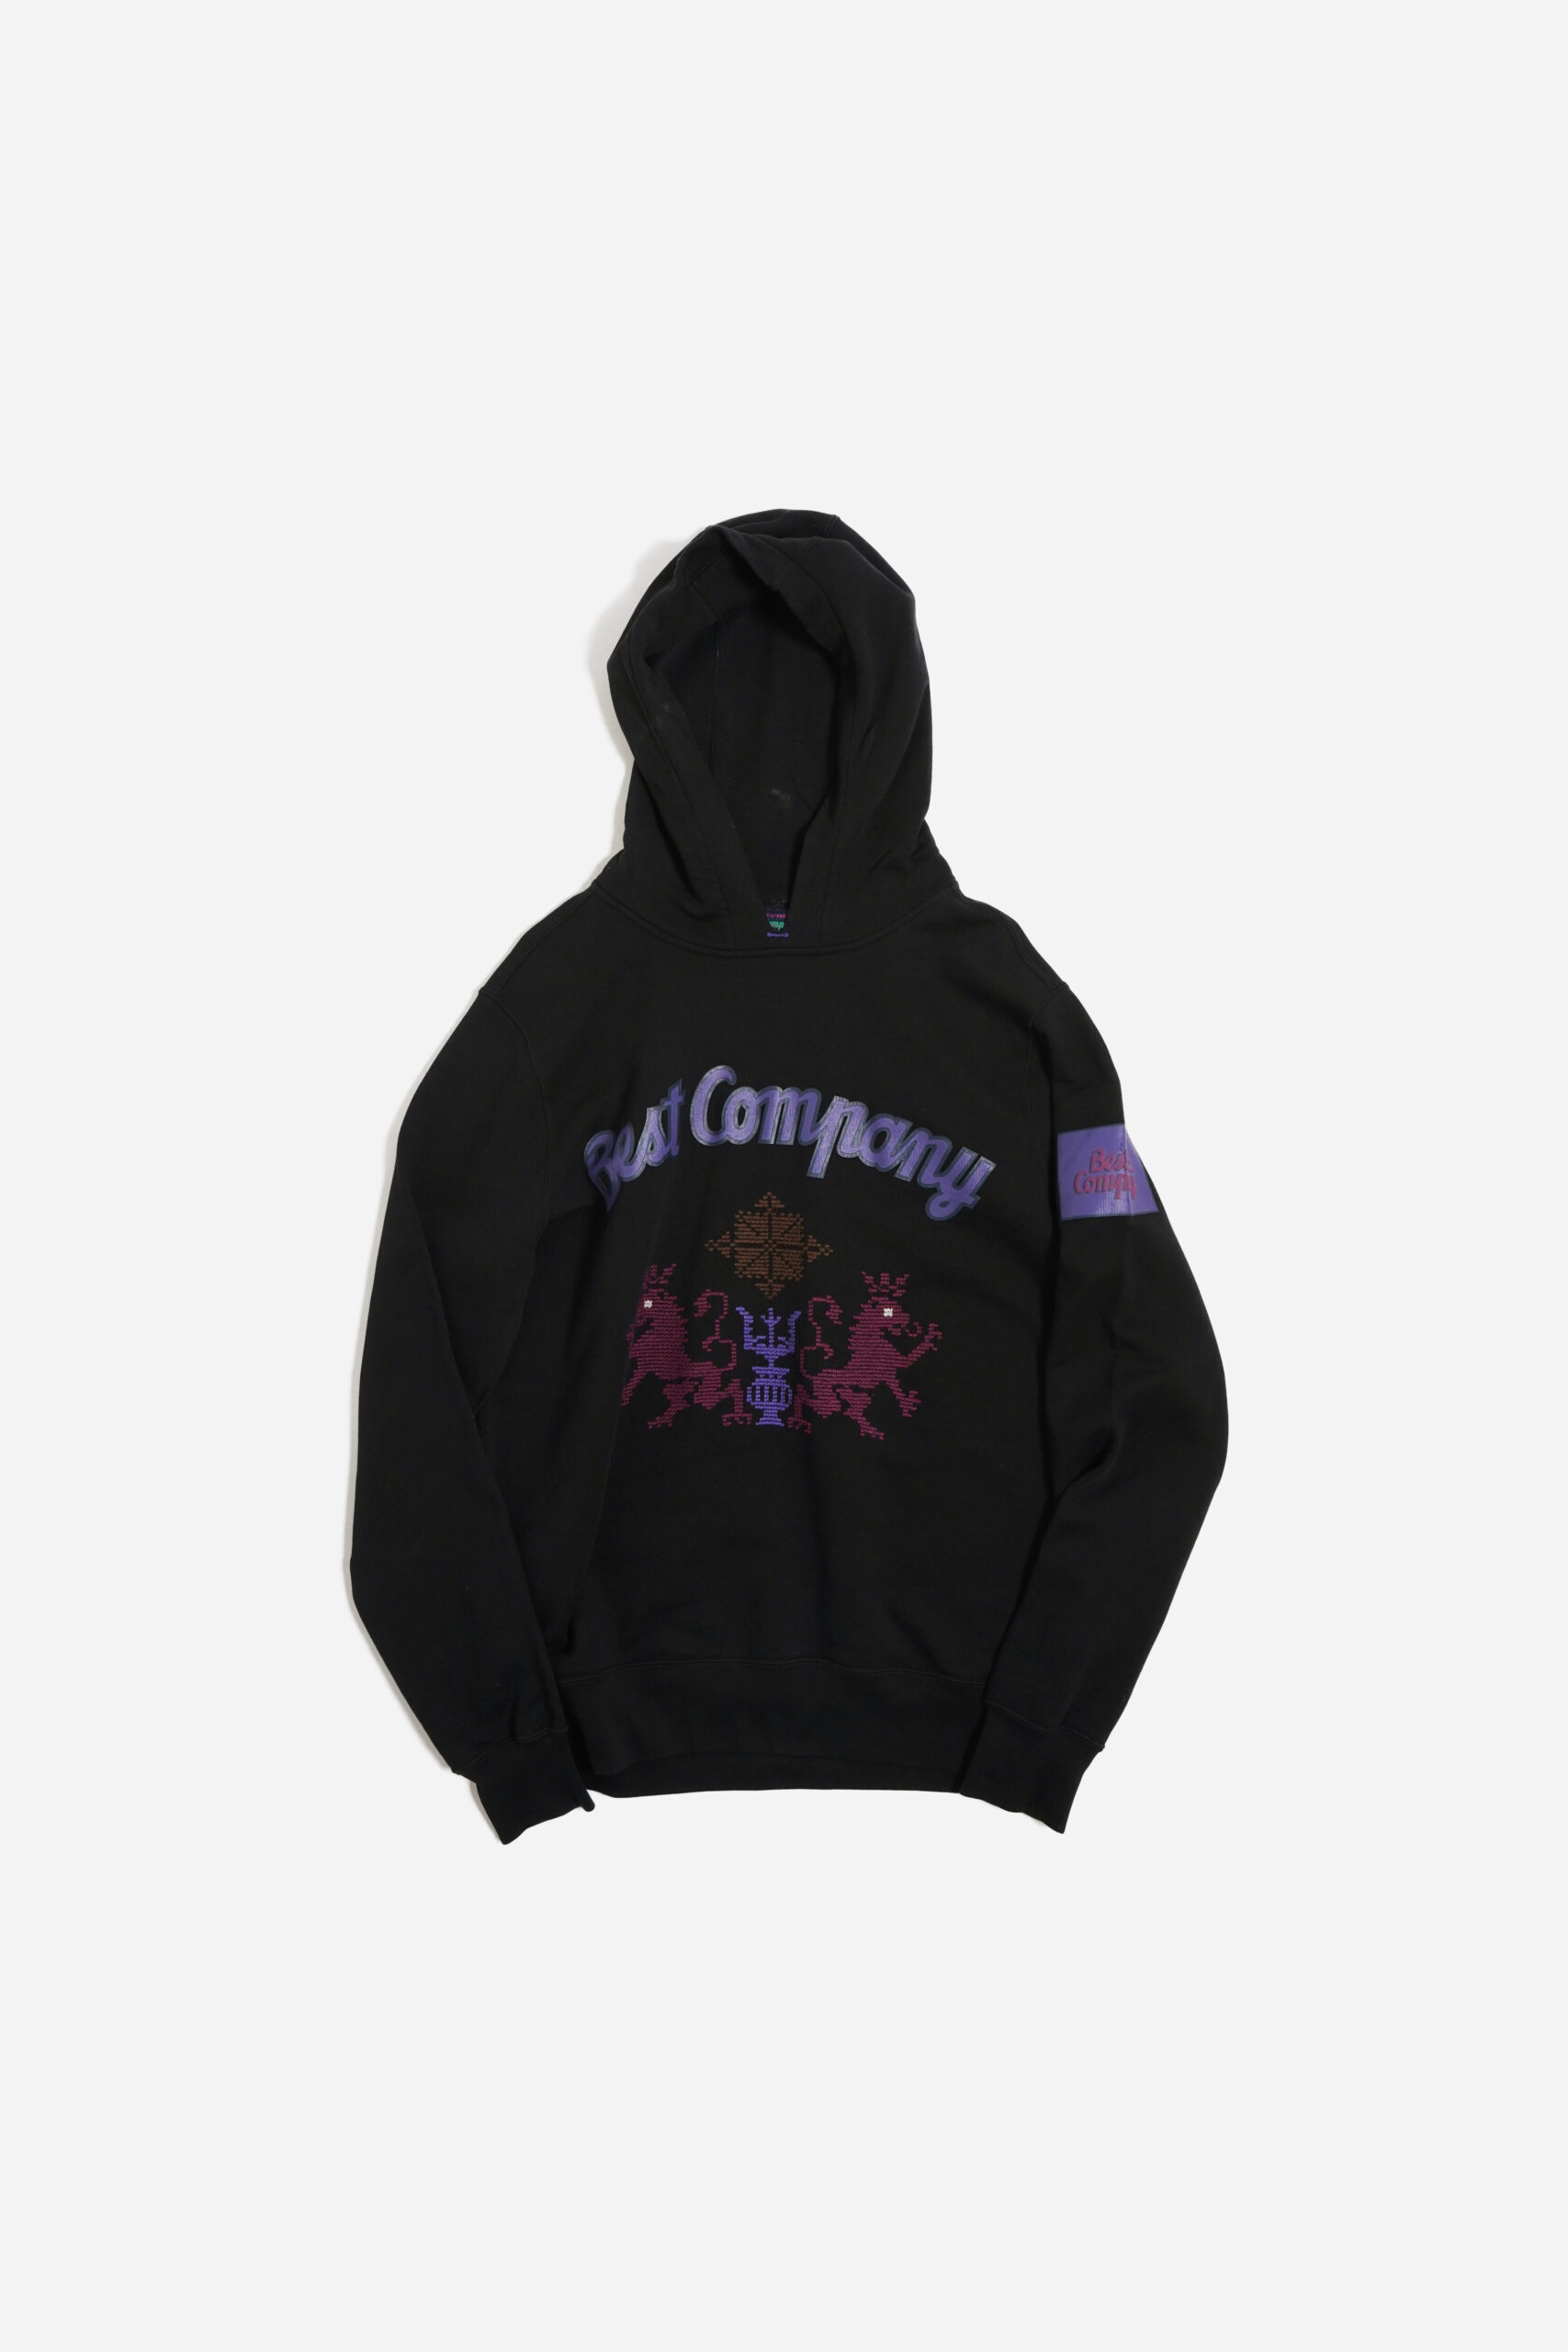 BEST COMPANY EMBROIDERY PRINT HOODIE